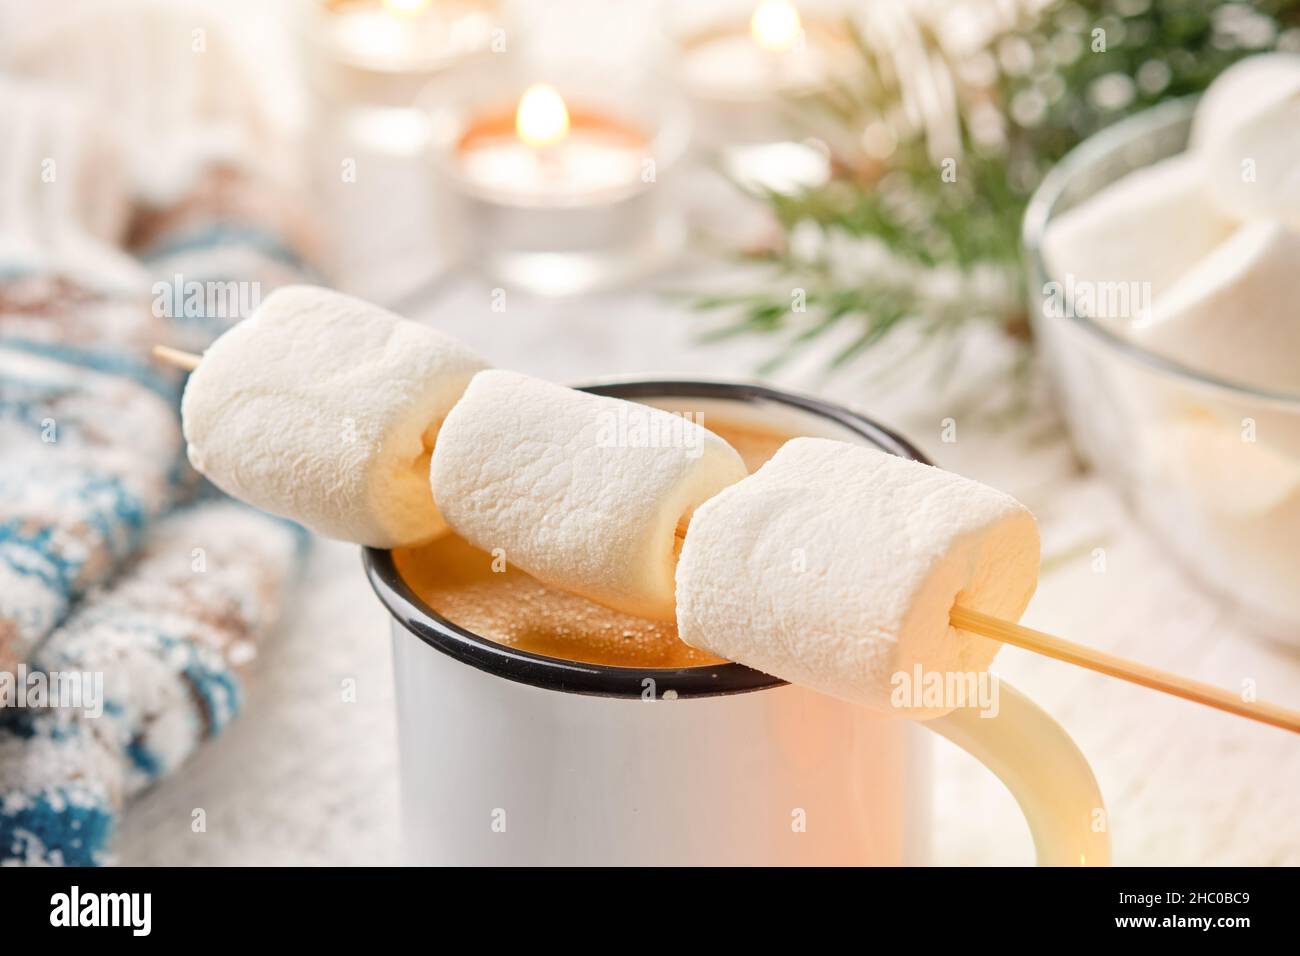 Hot coffee or chocolate mug and skewer with marshmallow  for roasting. The concept of cosy holidays and winter. Stock Photo